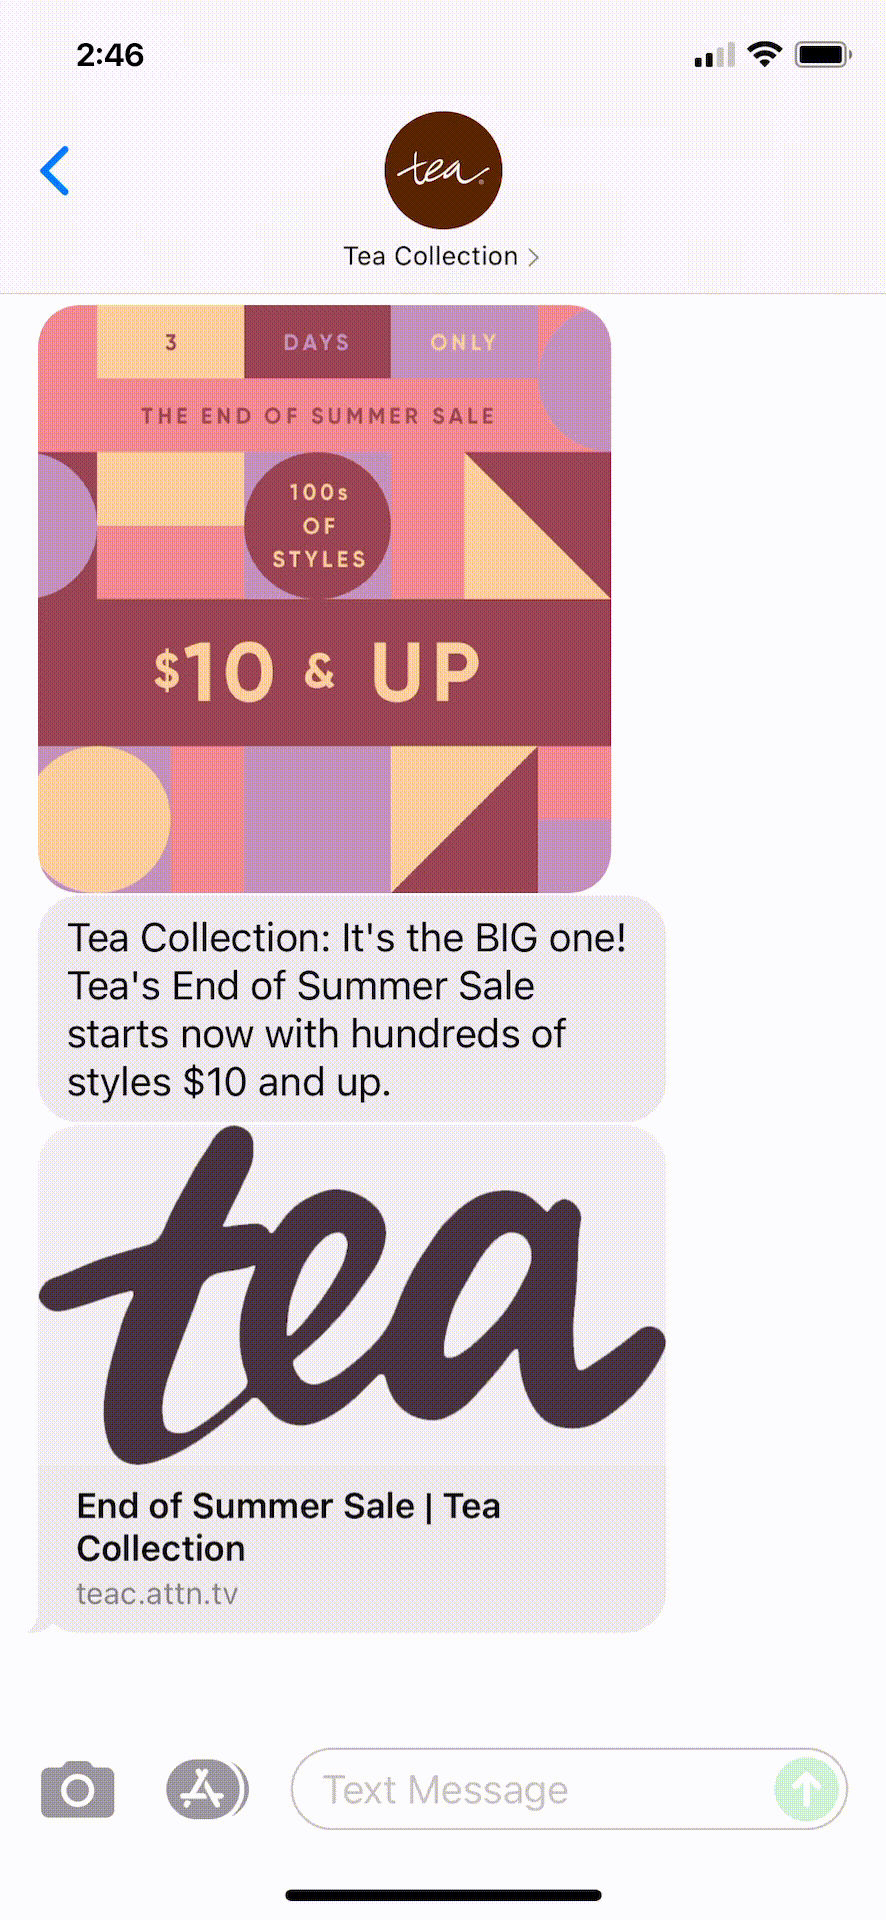 Tea-Collection-Text-Message-Marketing-Example-08.06.2021